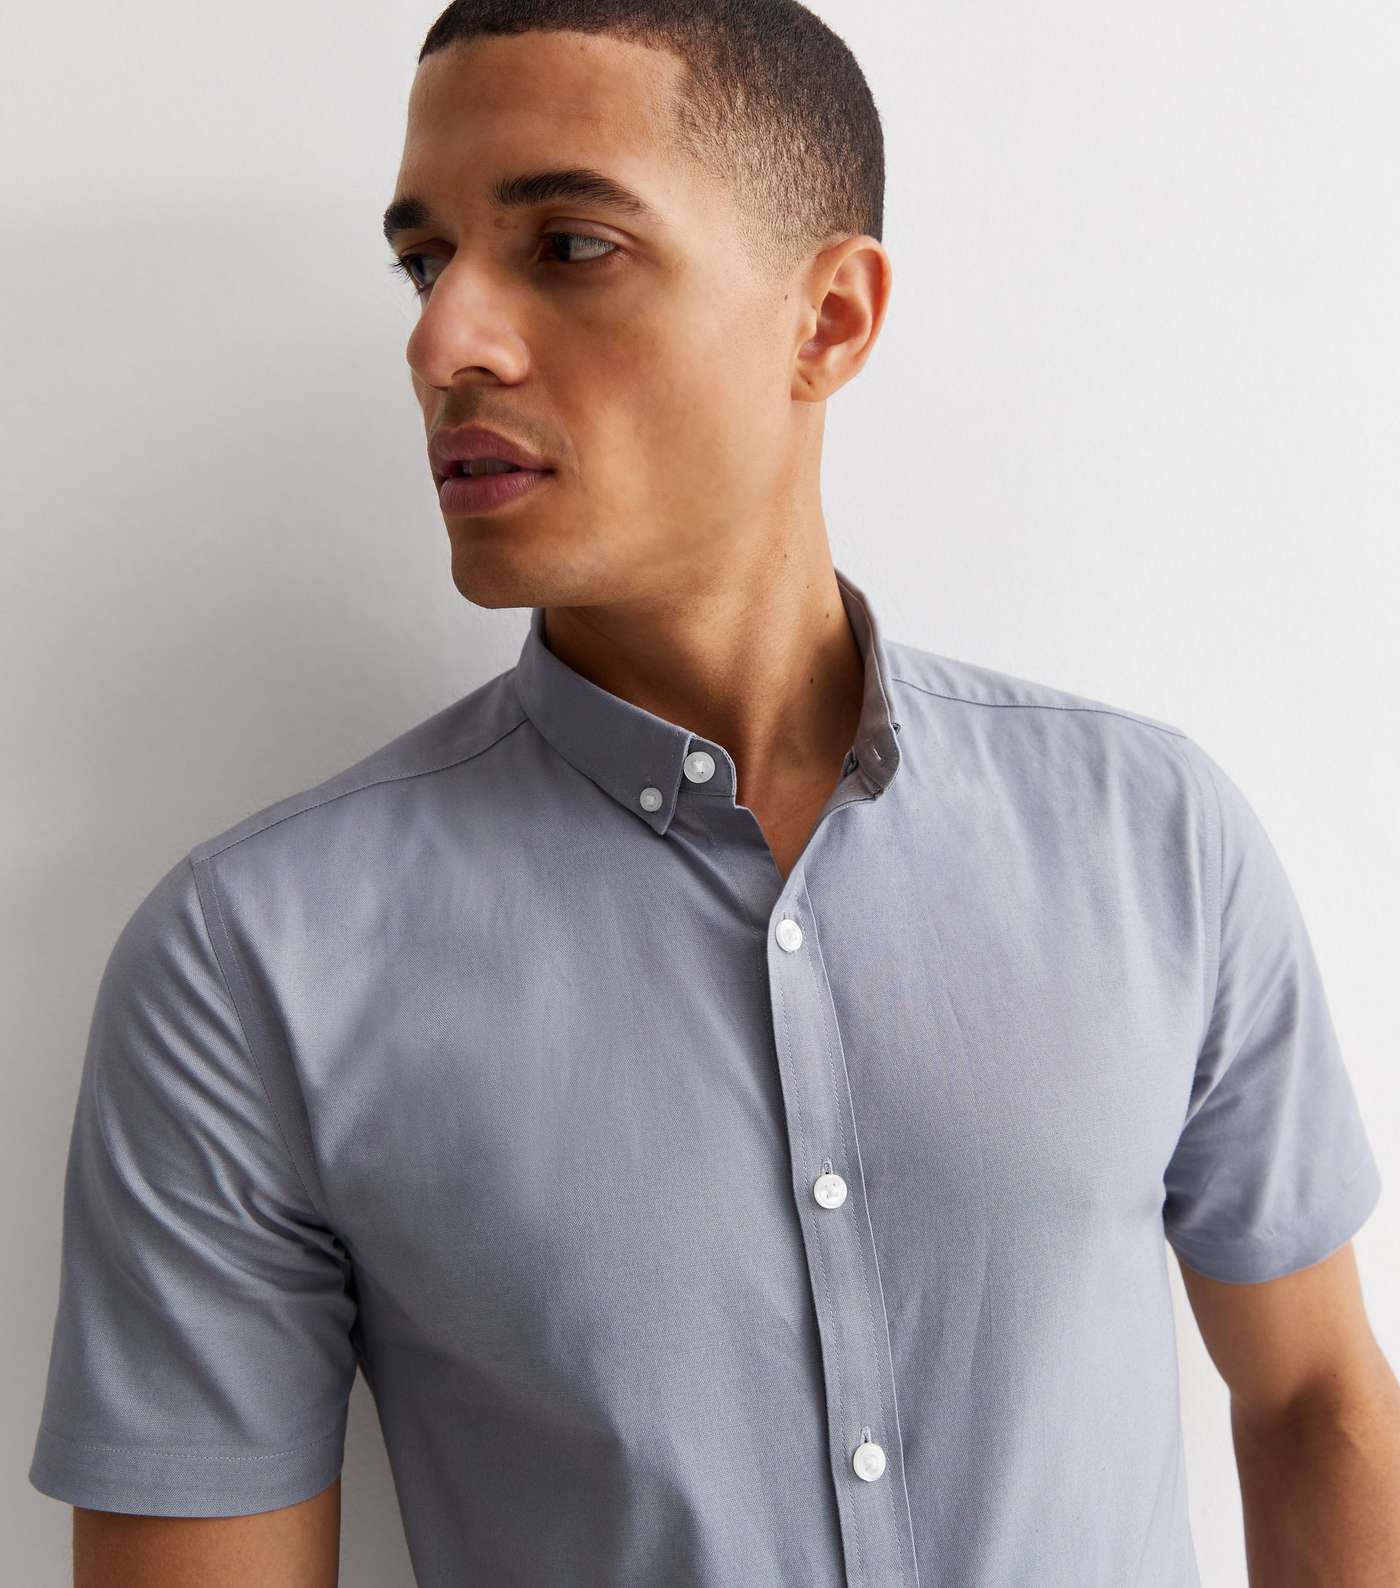 Pale Grey Short Sleeve Muscle Fit Oxford Shirt Image 2